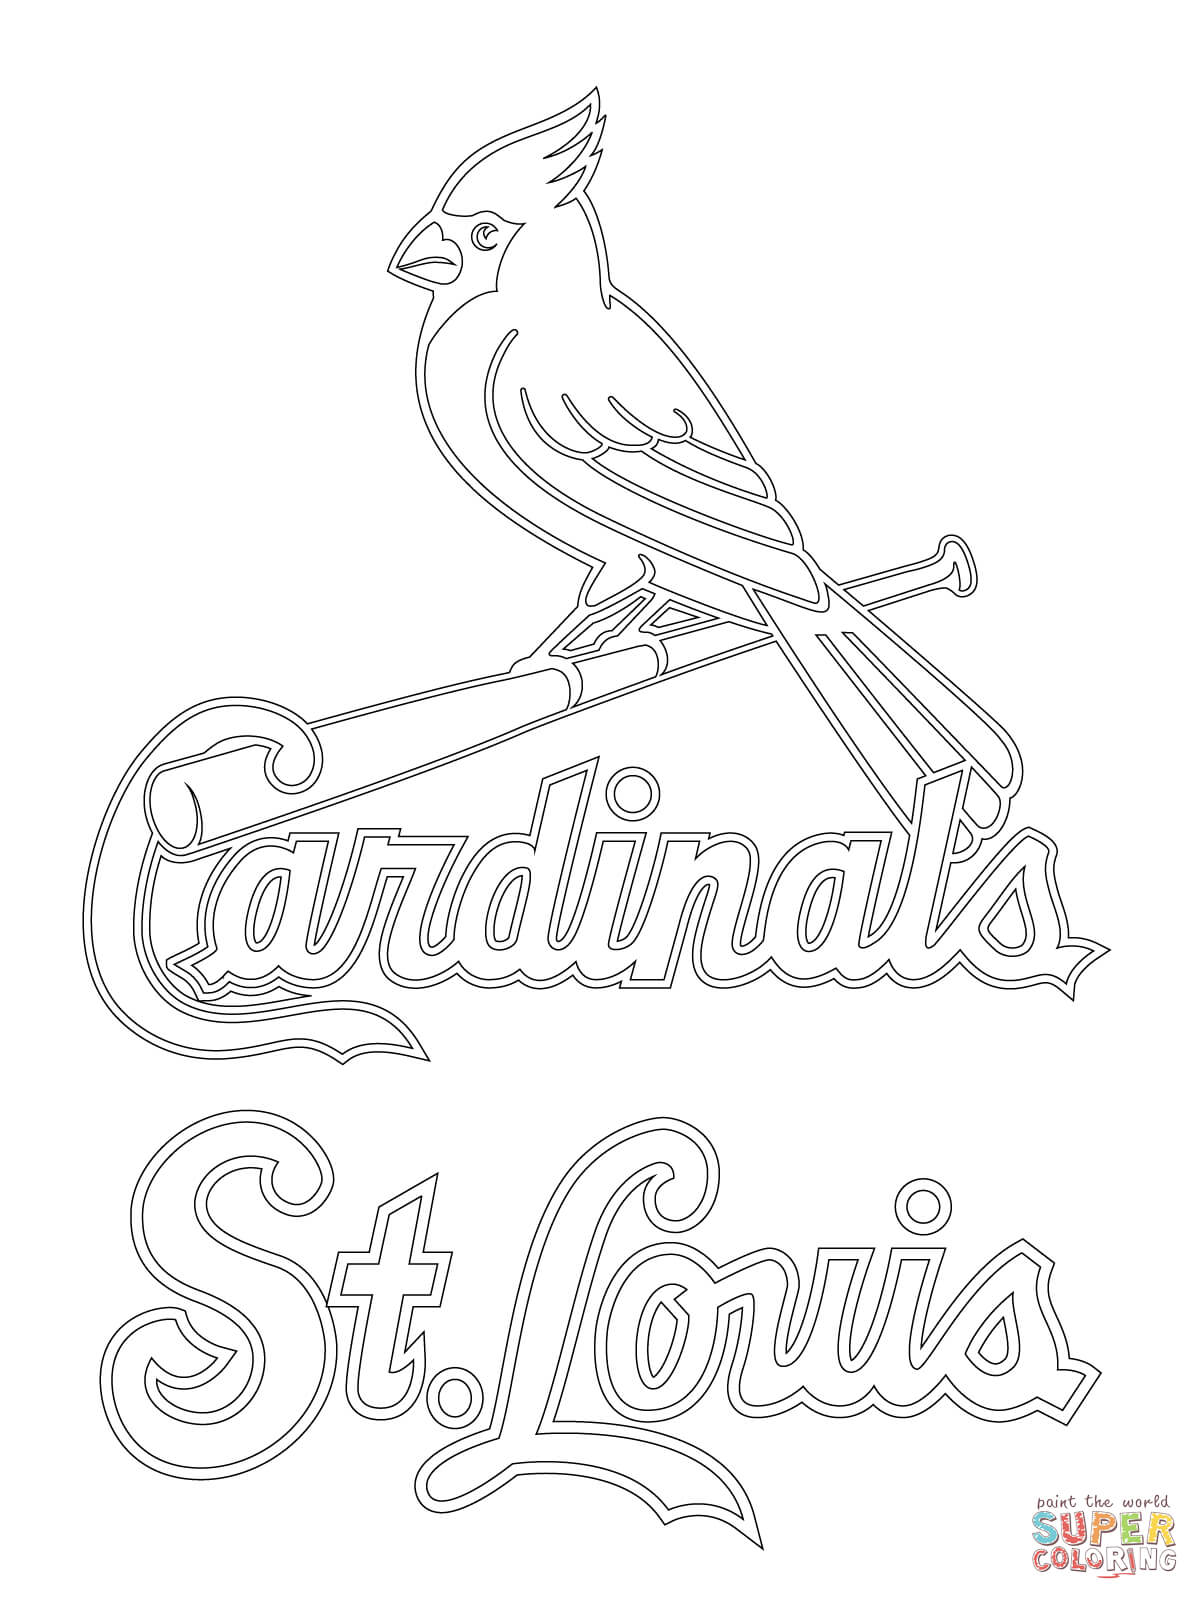 St louis cardinals logo coloring page free printable coloring pages